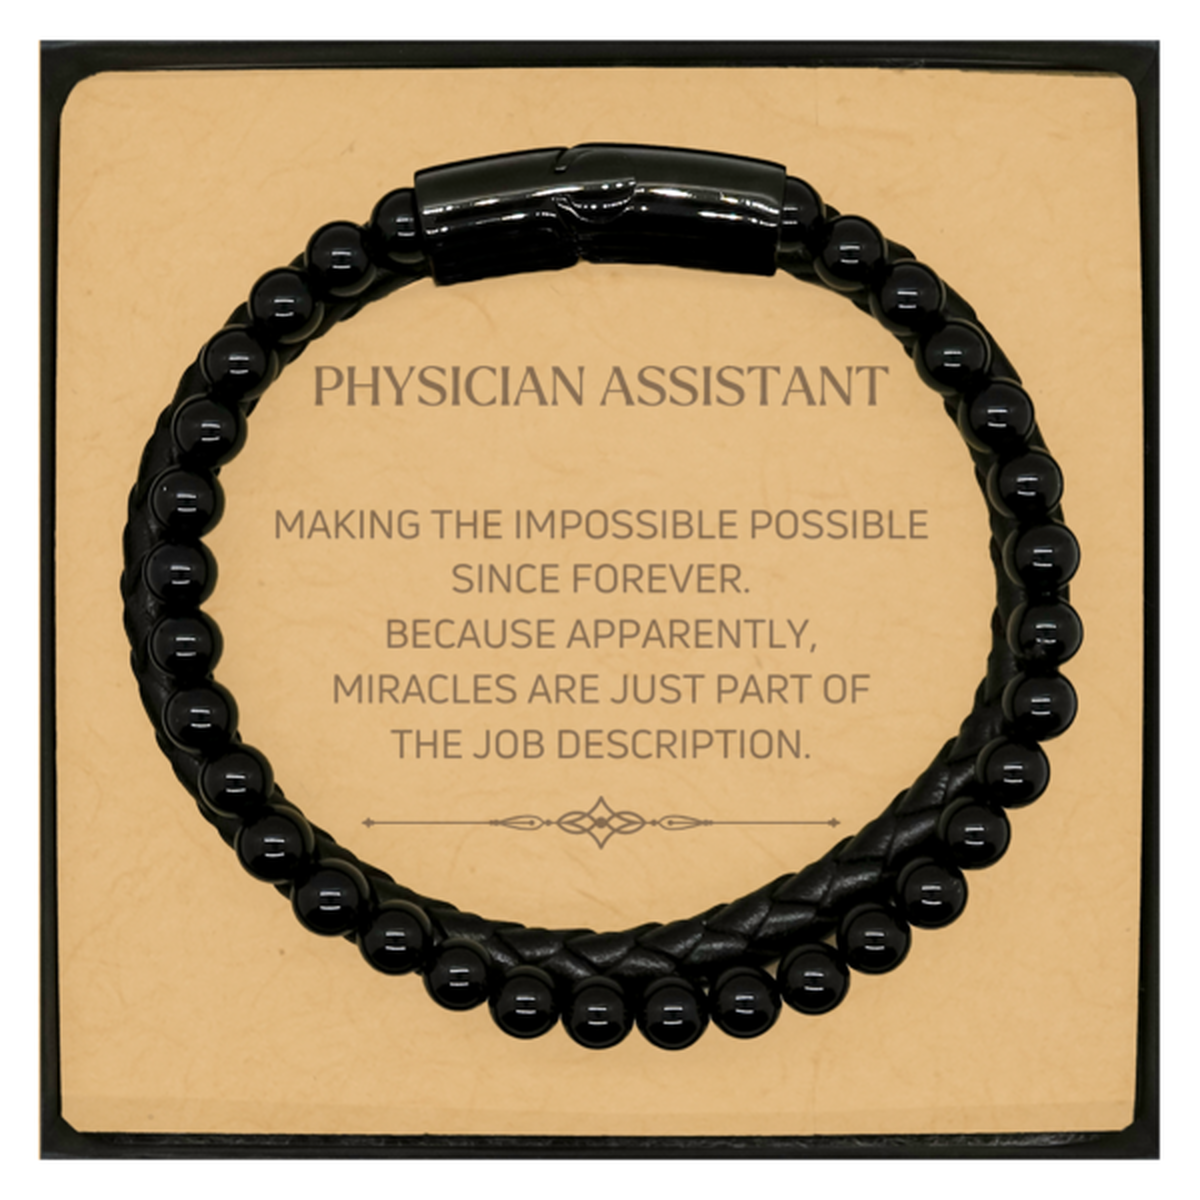 Funny Physician Assistant Gifts, Miracles are just part of the job description, Inspirational Birthday Christmas Stone Leather Bracelets For Physician Assistant, Men, Women, Coworkers, Friends, Boss